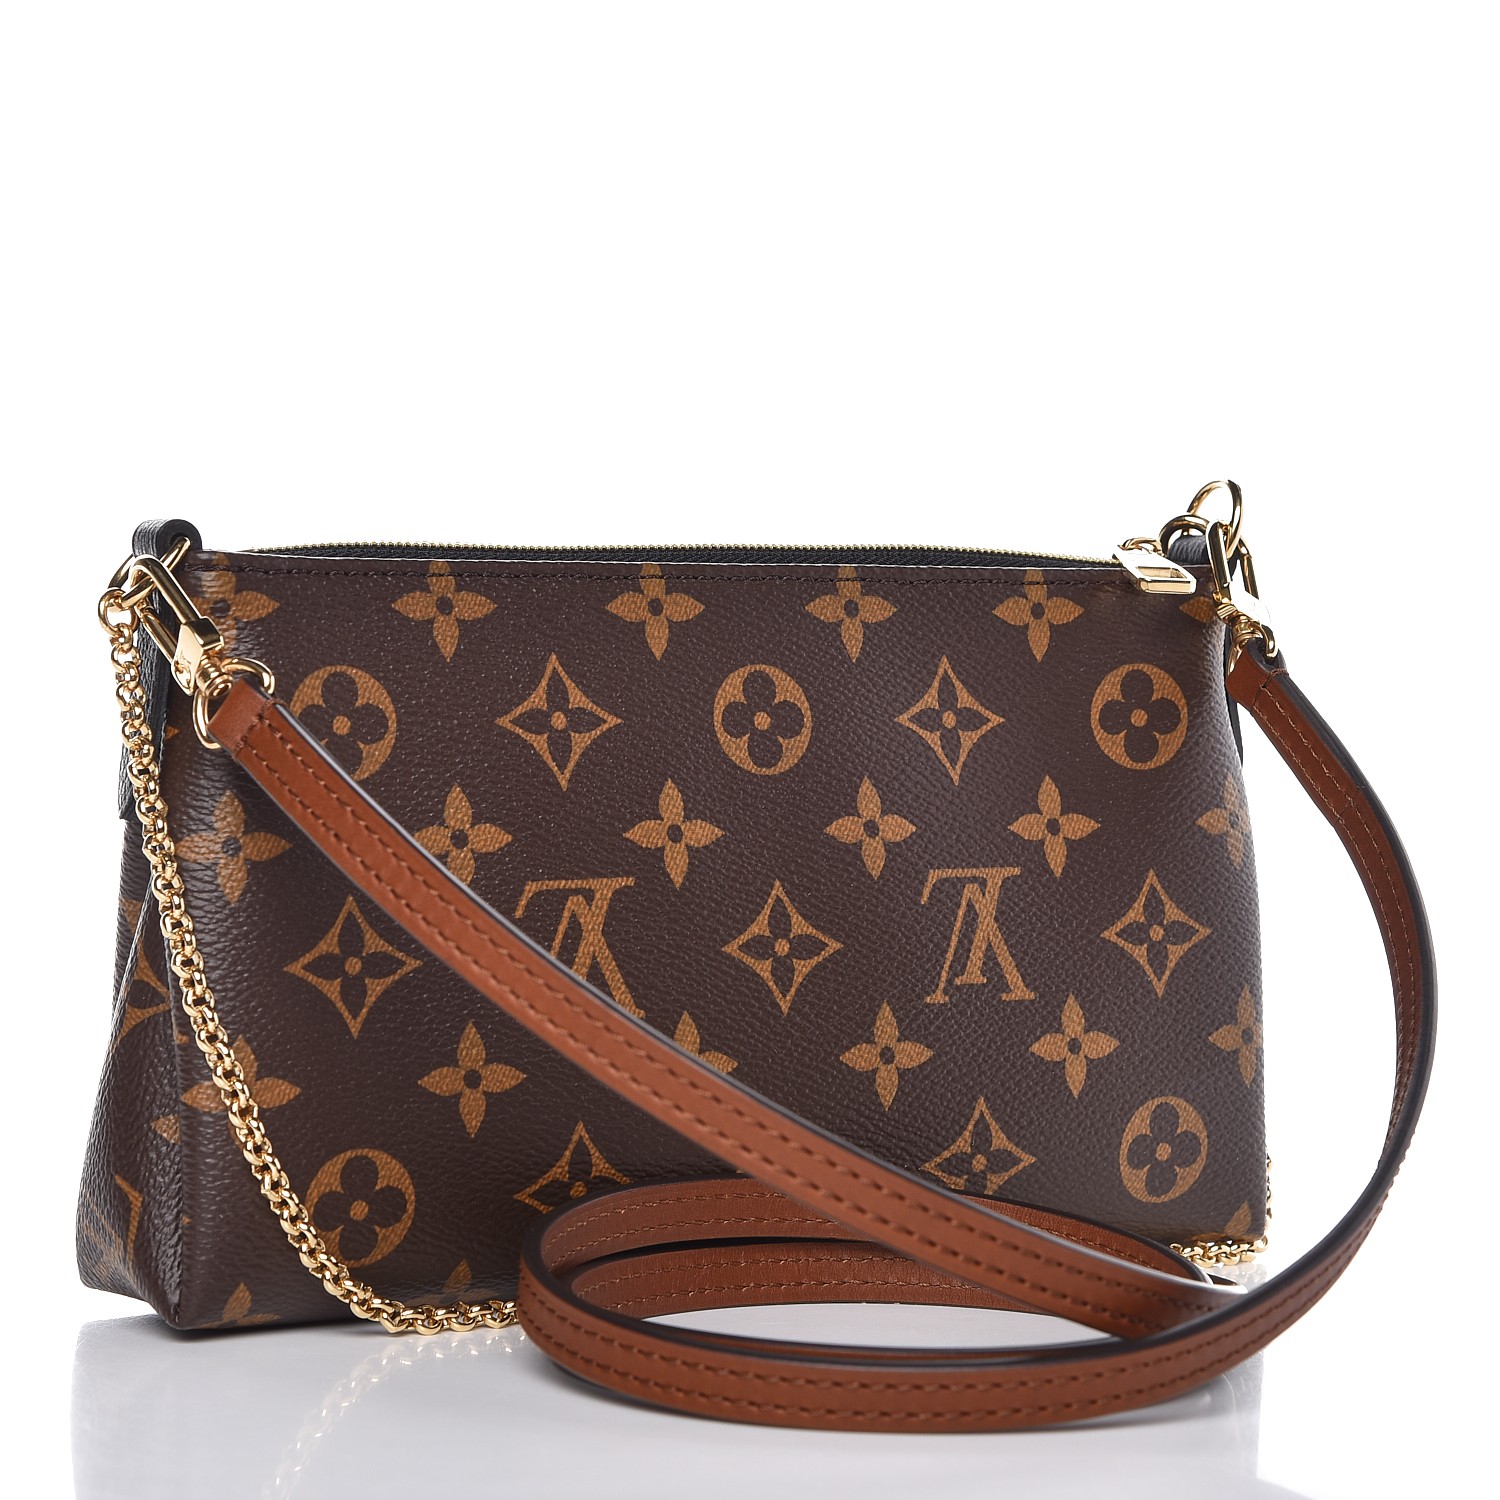 Louis Vuitton - Rose Leather Monogram Altair Limited Edition Clutch